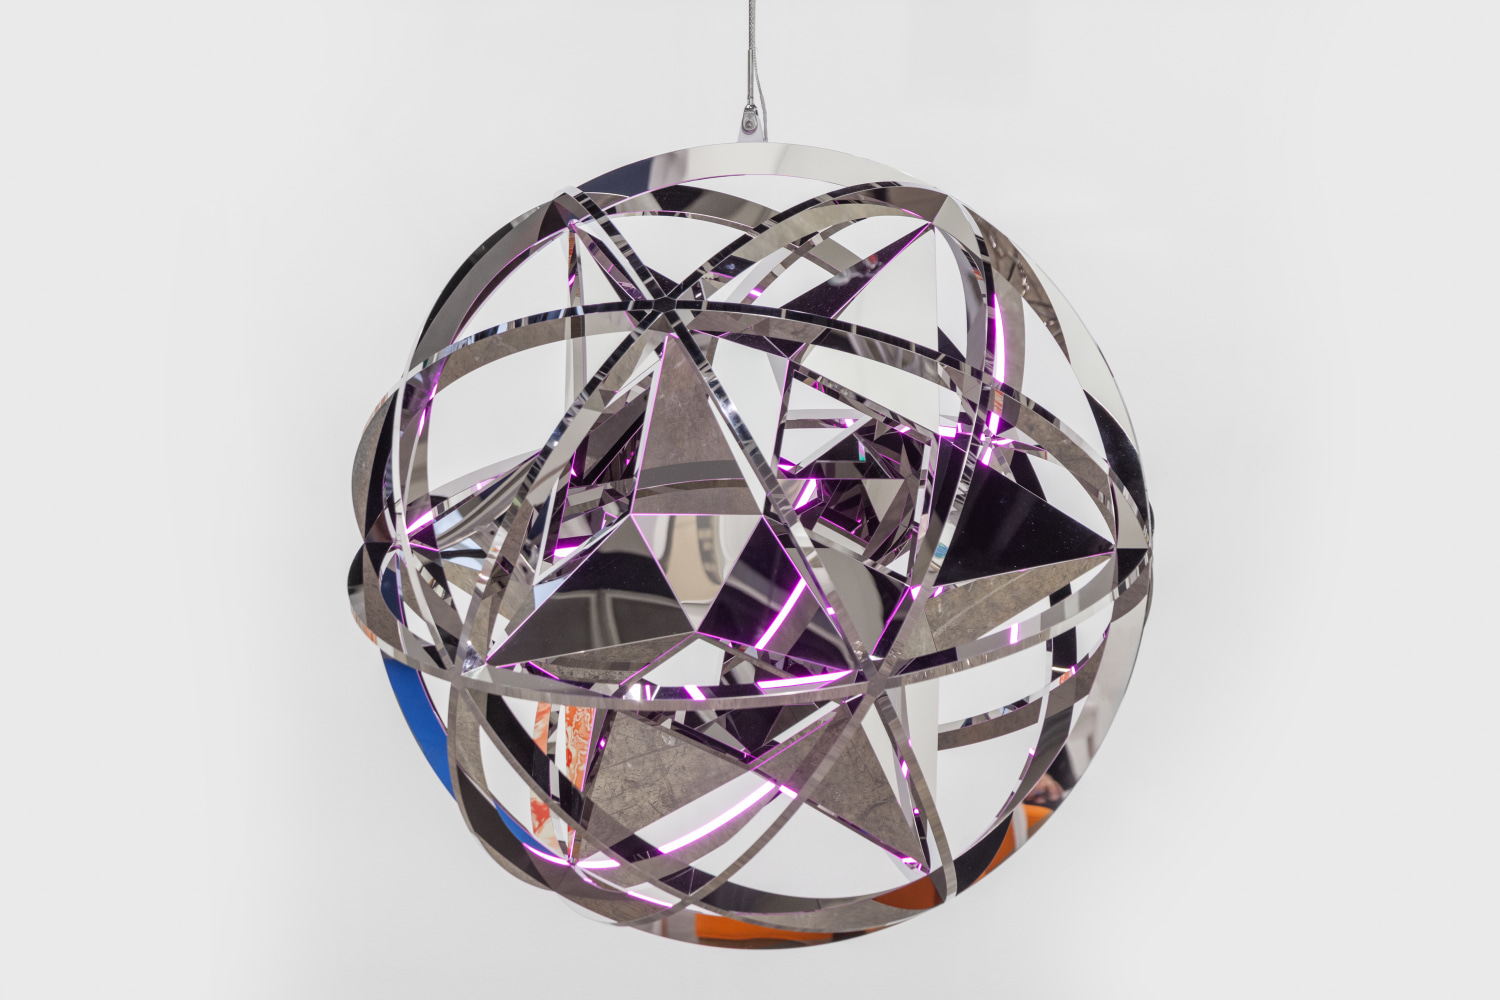 Jeppe Hein

Crown Chakra

2015

High polished stainless steel, aluminum, acrylic glass, LED

39 1/2 inches (100 cm) diameter

Edition&amp;nbsp;of 3, with 2 AP

JH 314

&amp;nbsp;

INQUIRE